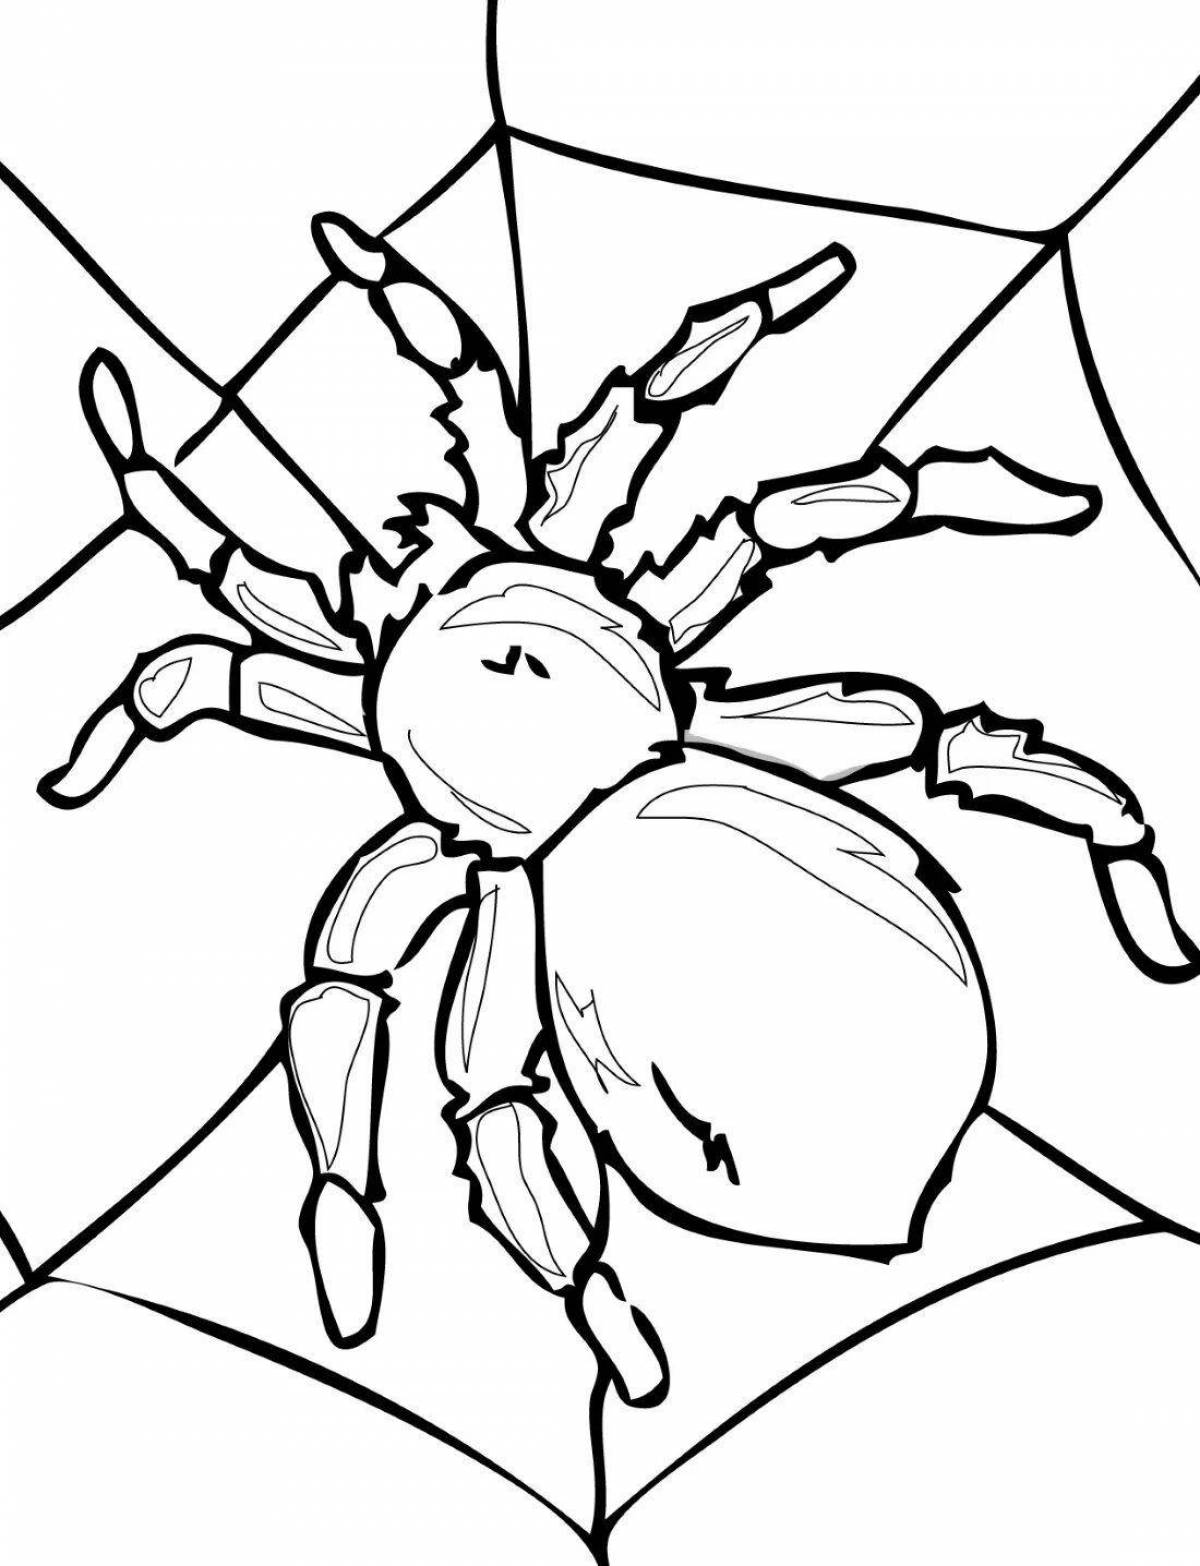 Coloring page spectacular spider tarantula